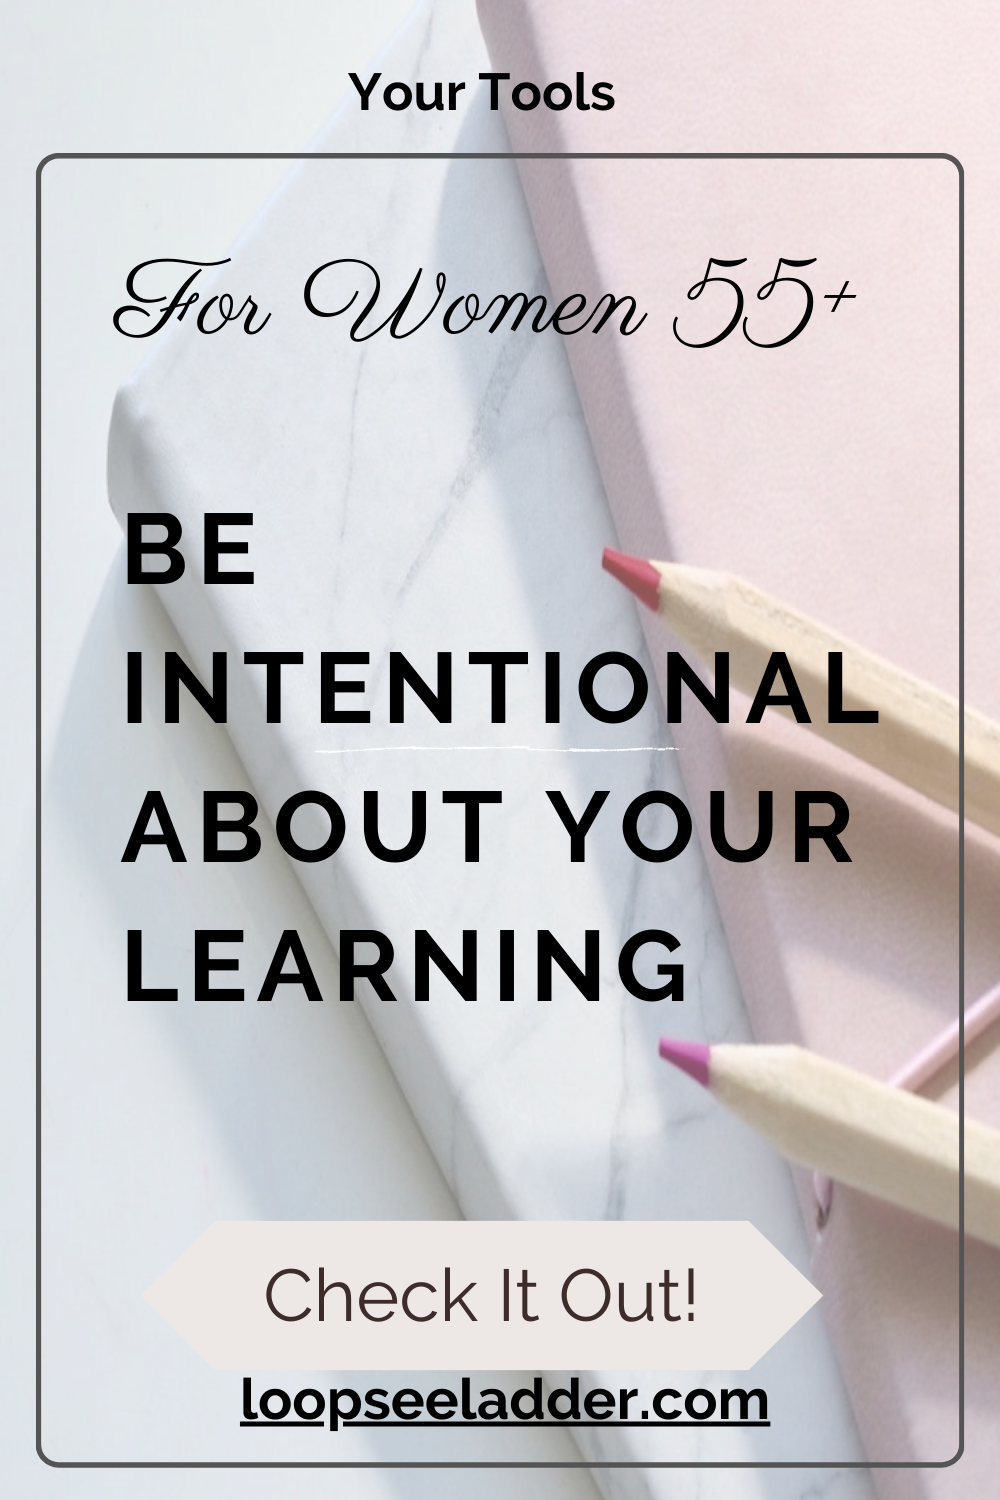 Why Women 55+ Are Intentional About Learning